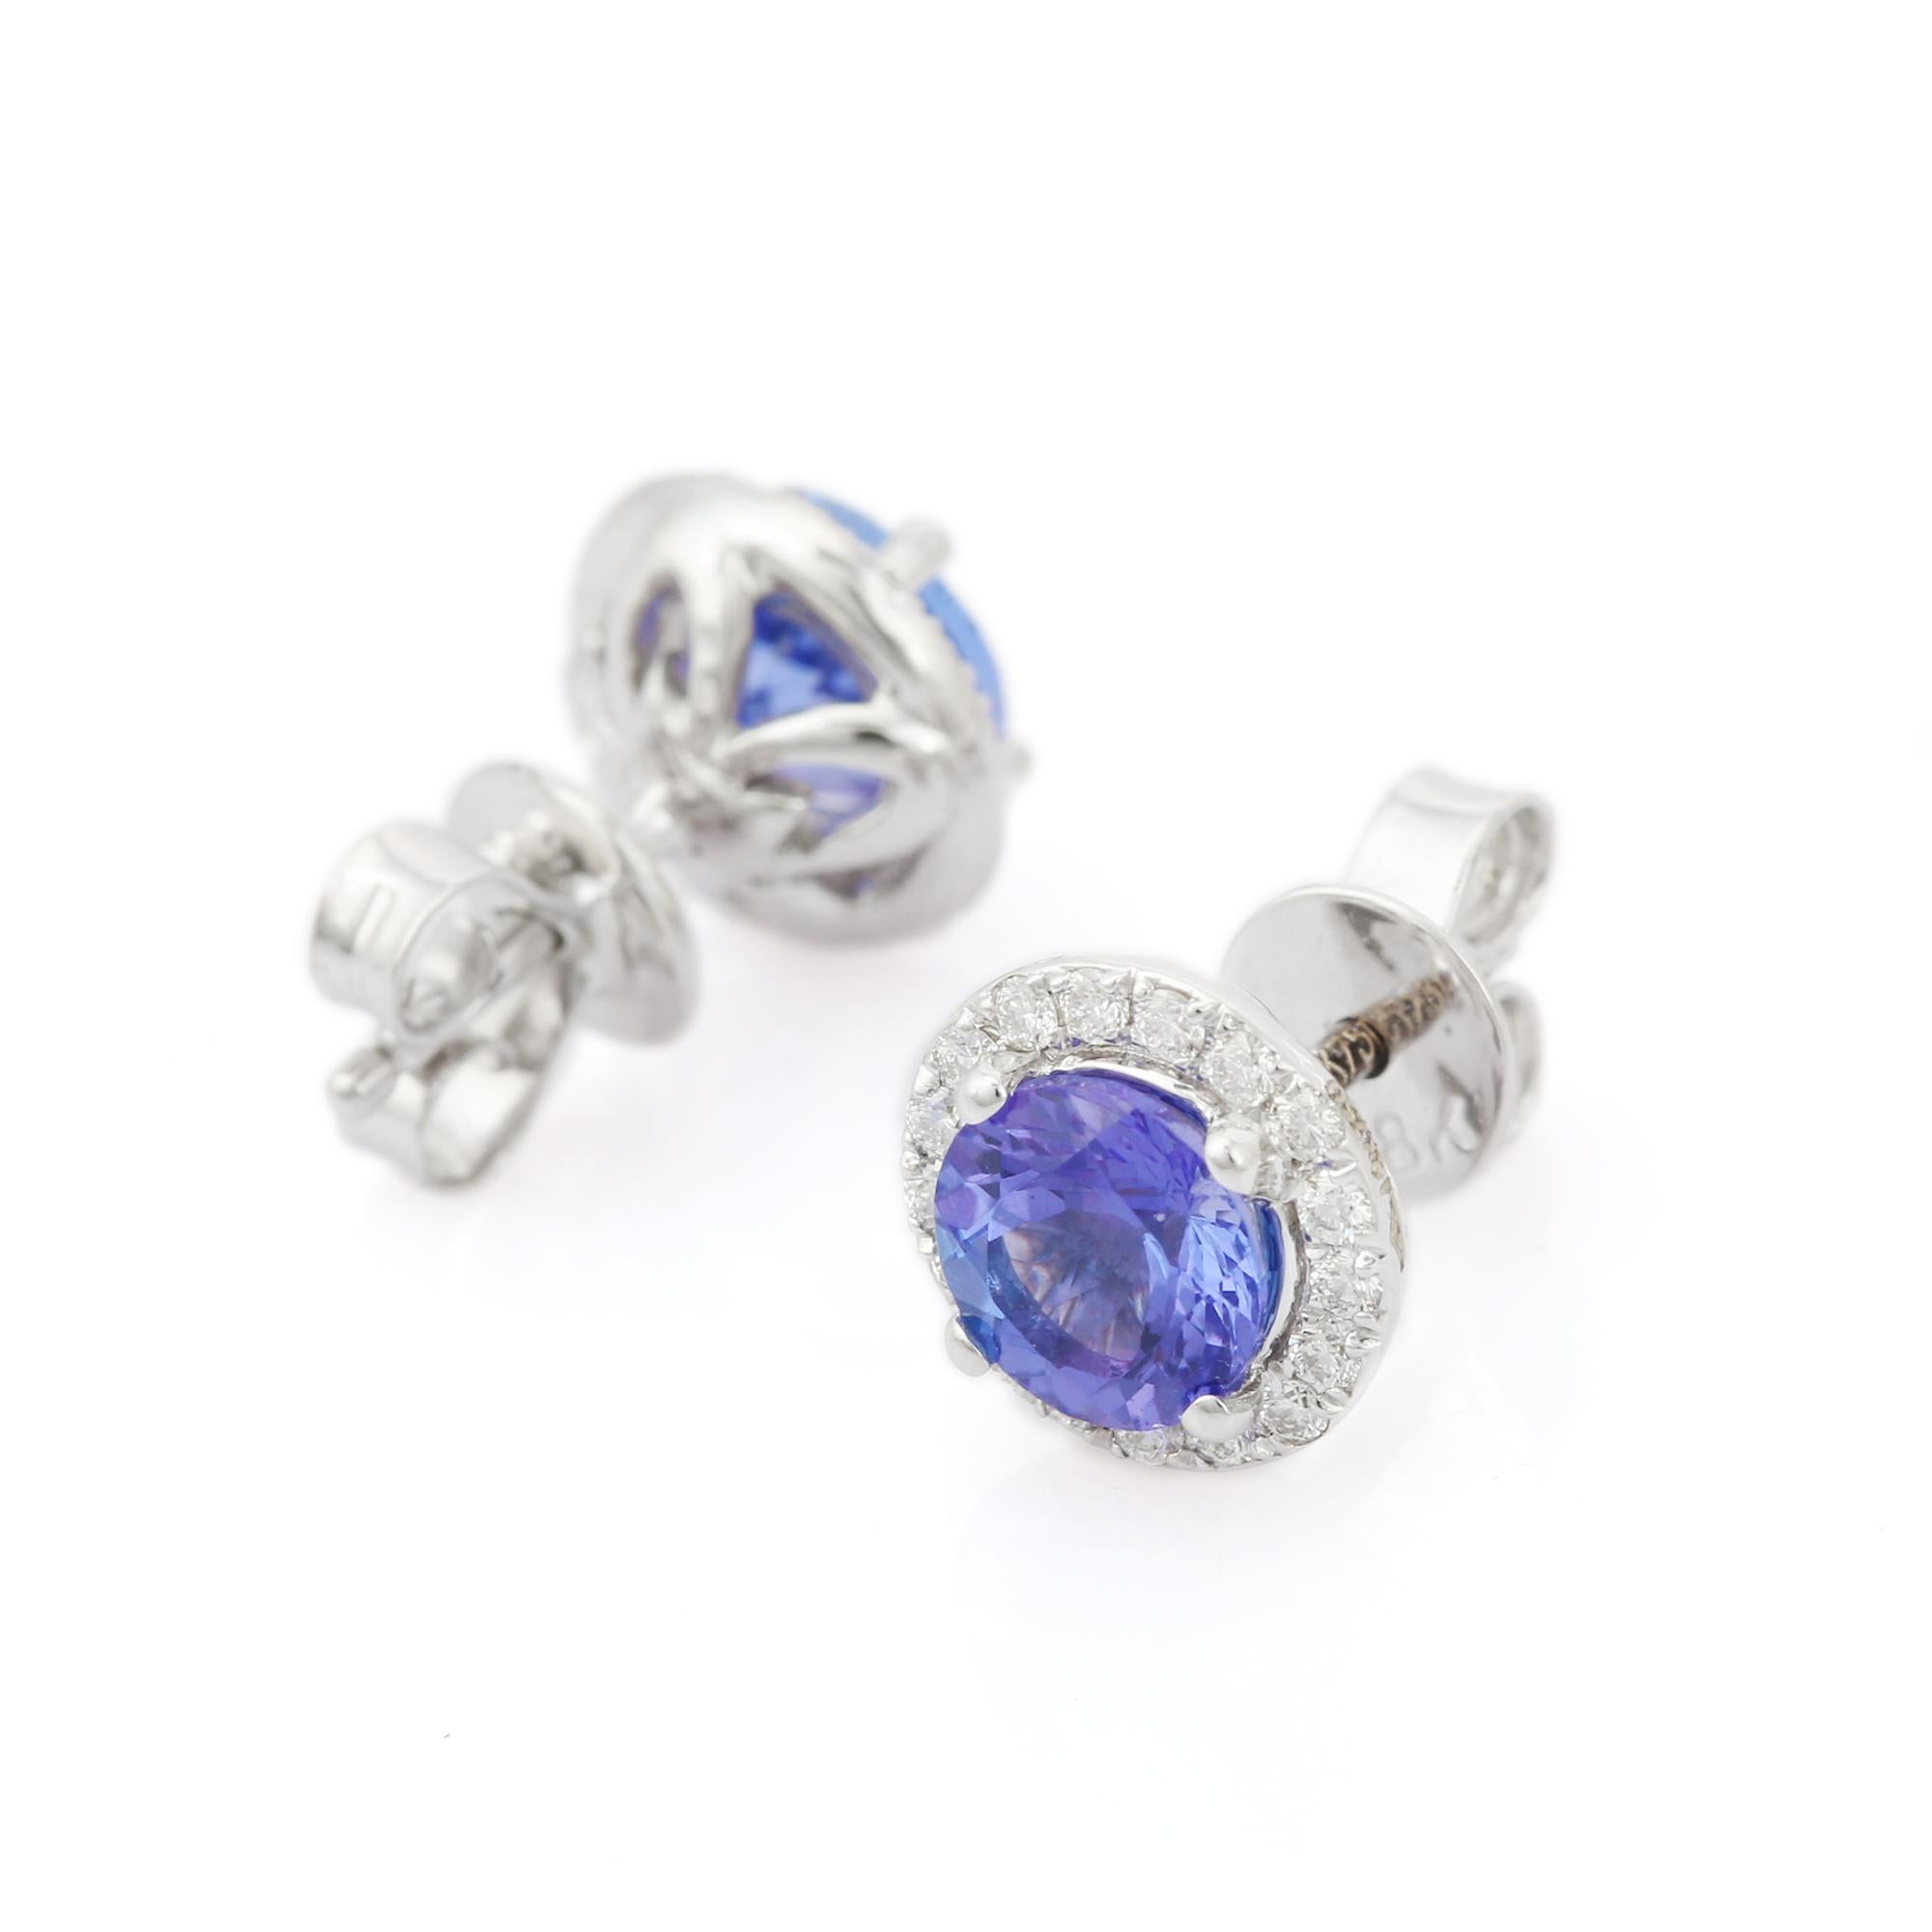 Perfect Blue 1.75 Ct Tanzanite and Diamond Stud Earrings in 18K White Gold In New Condition For Sale In Houston, TX